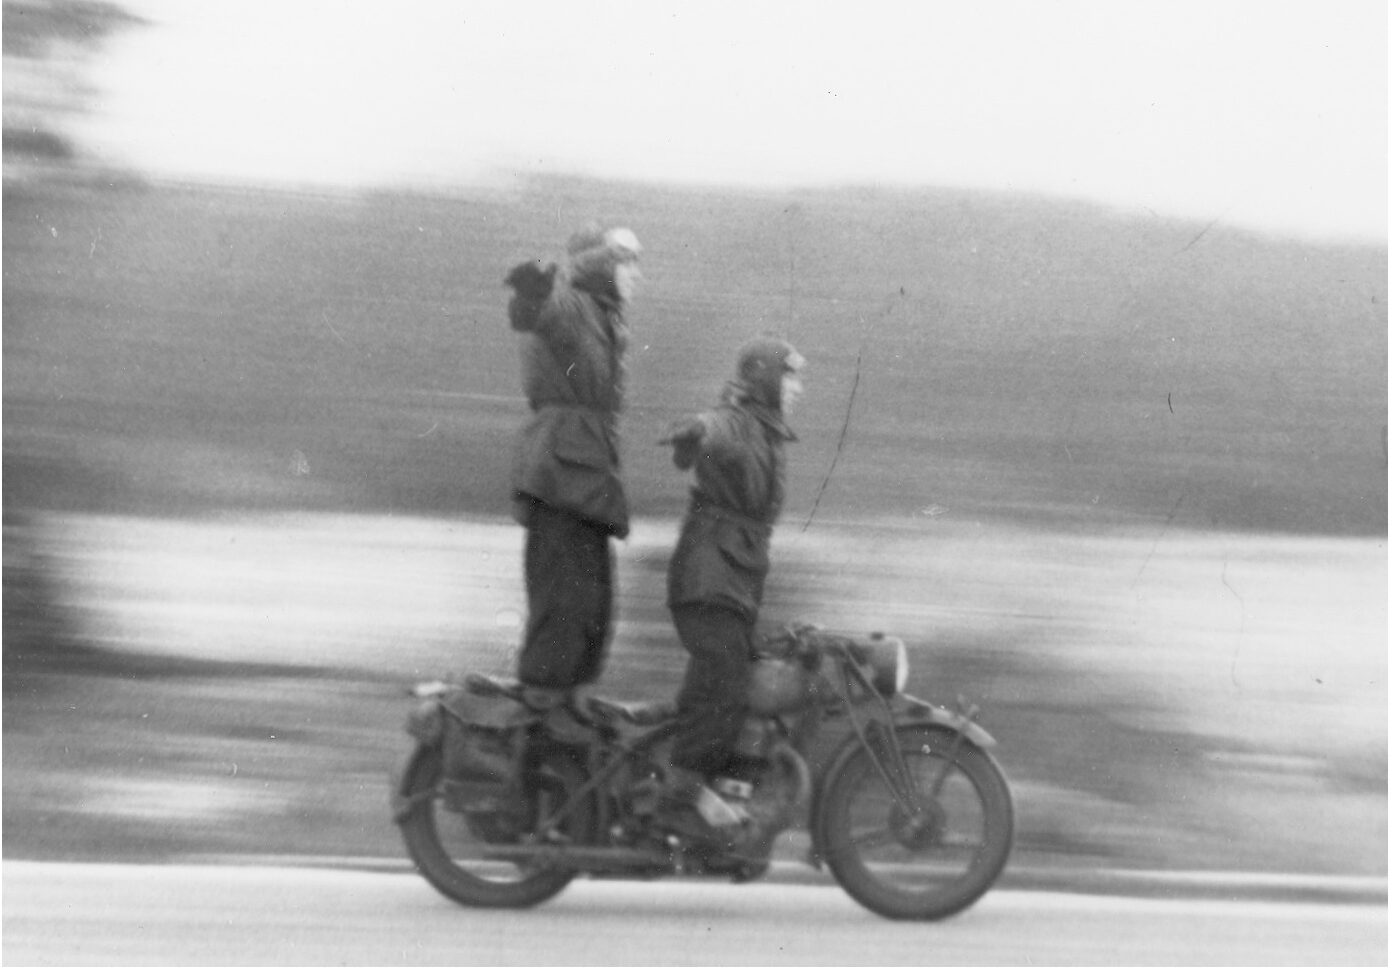 This is one of the last pictures Patton ever took. While in Sweden 10 days before his fatal car accident, he visited some motorcycle troops who put on a precision drill for him. Patton pulled out his camera and snapped away. It was not until Beatrice received his effects after his death that she discovered the film in his camera and developed his last photos.